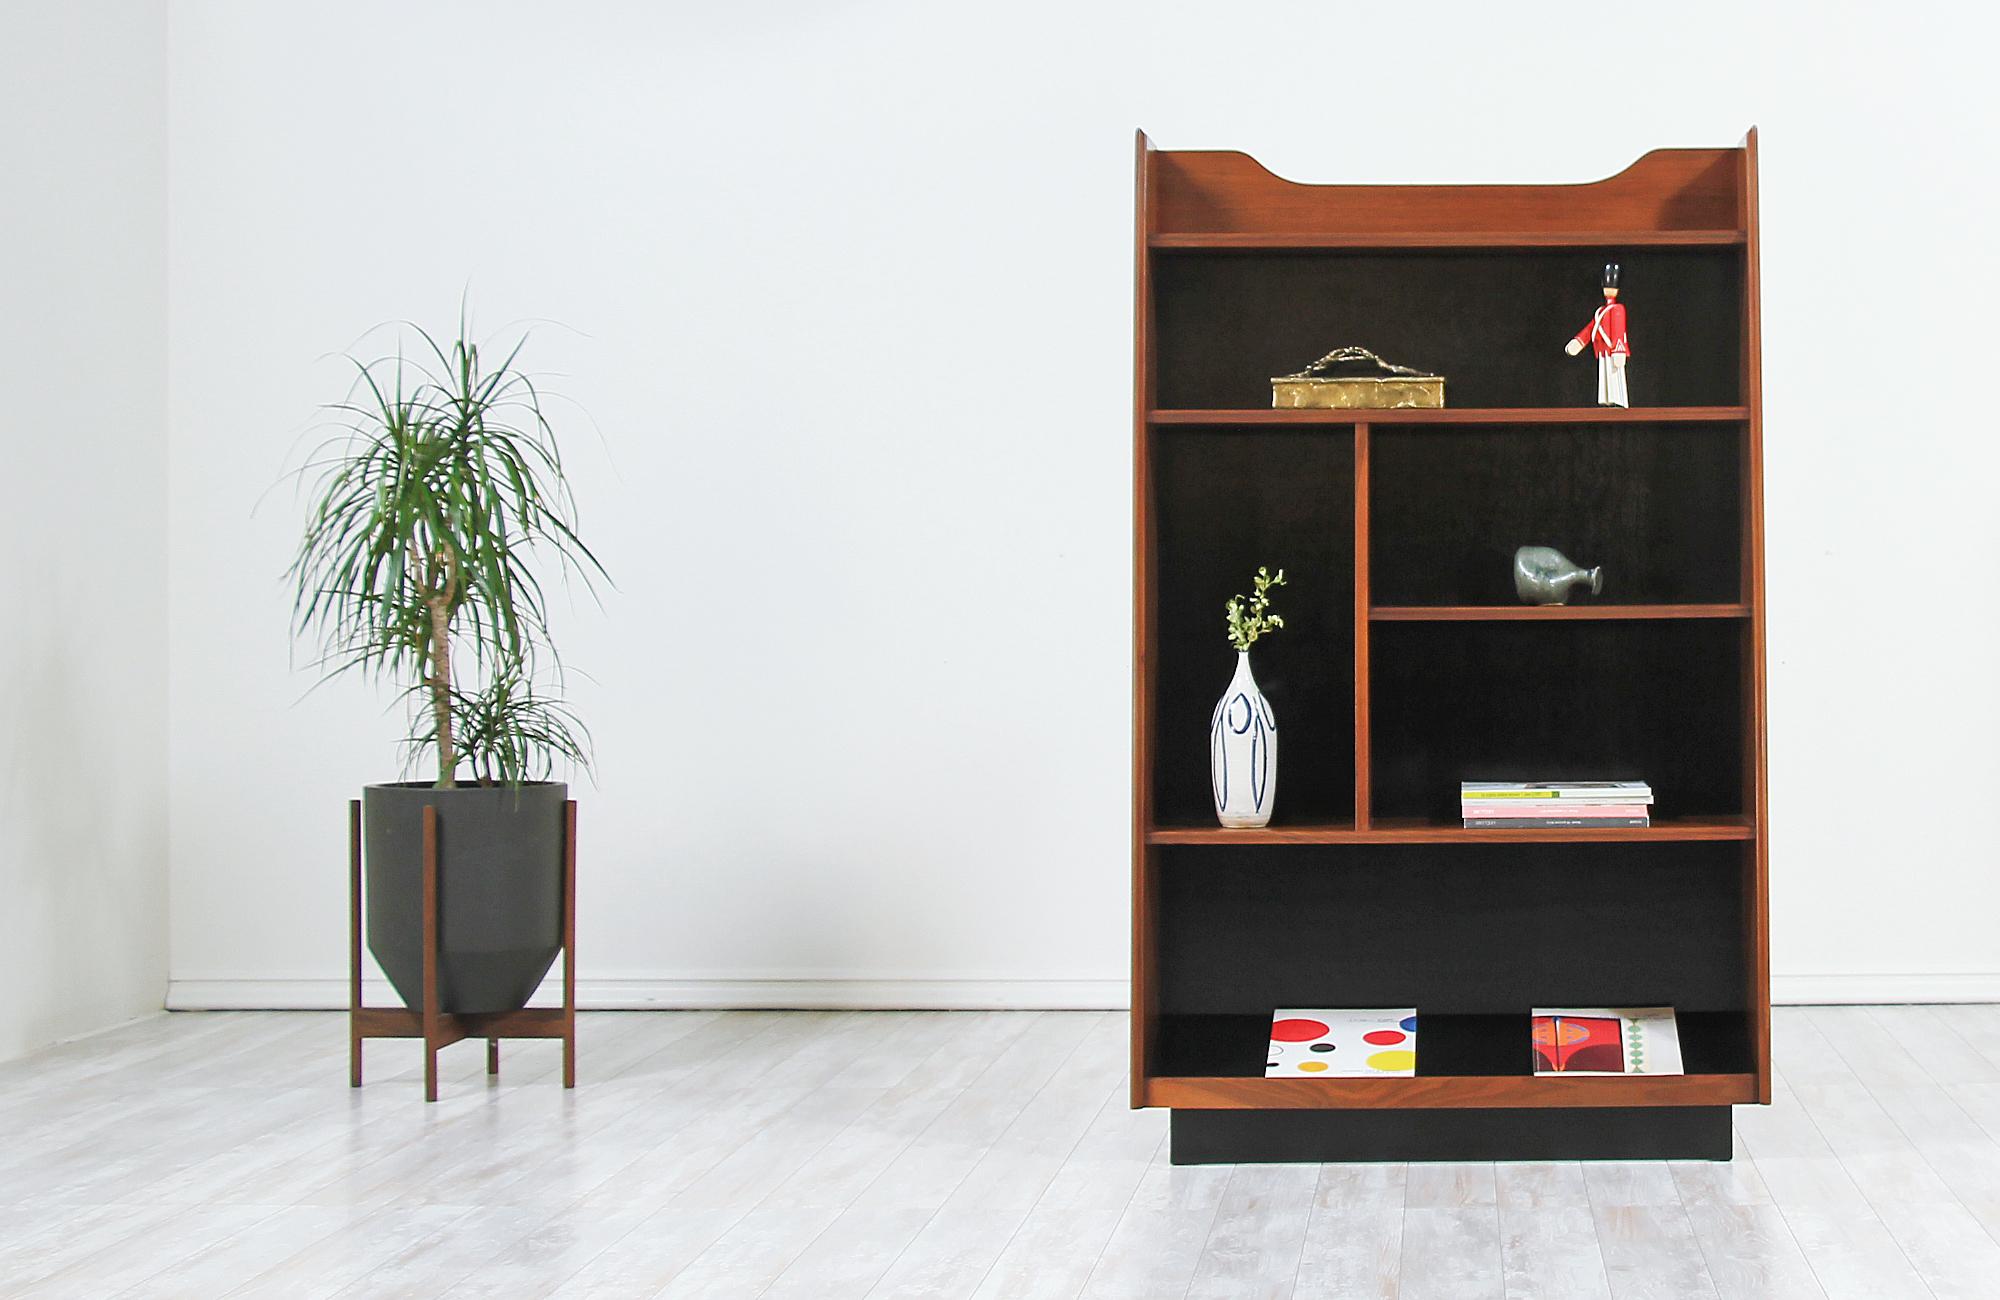 Stunning standing bookshelf designed by Merton L. Gershun for Dillingham in the United States, circa 1960s. This rare design features a walnut wood case with black satin lacquered wood shelving interior striking a tall and angled silhouette to